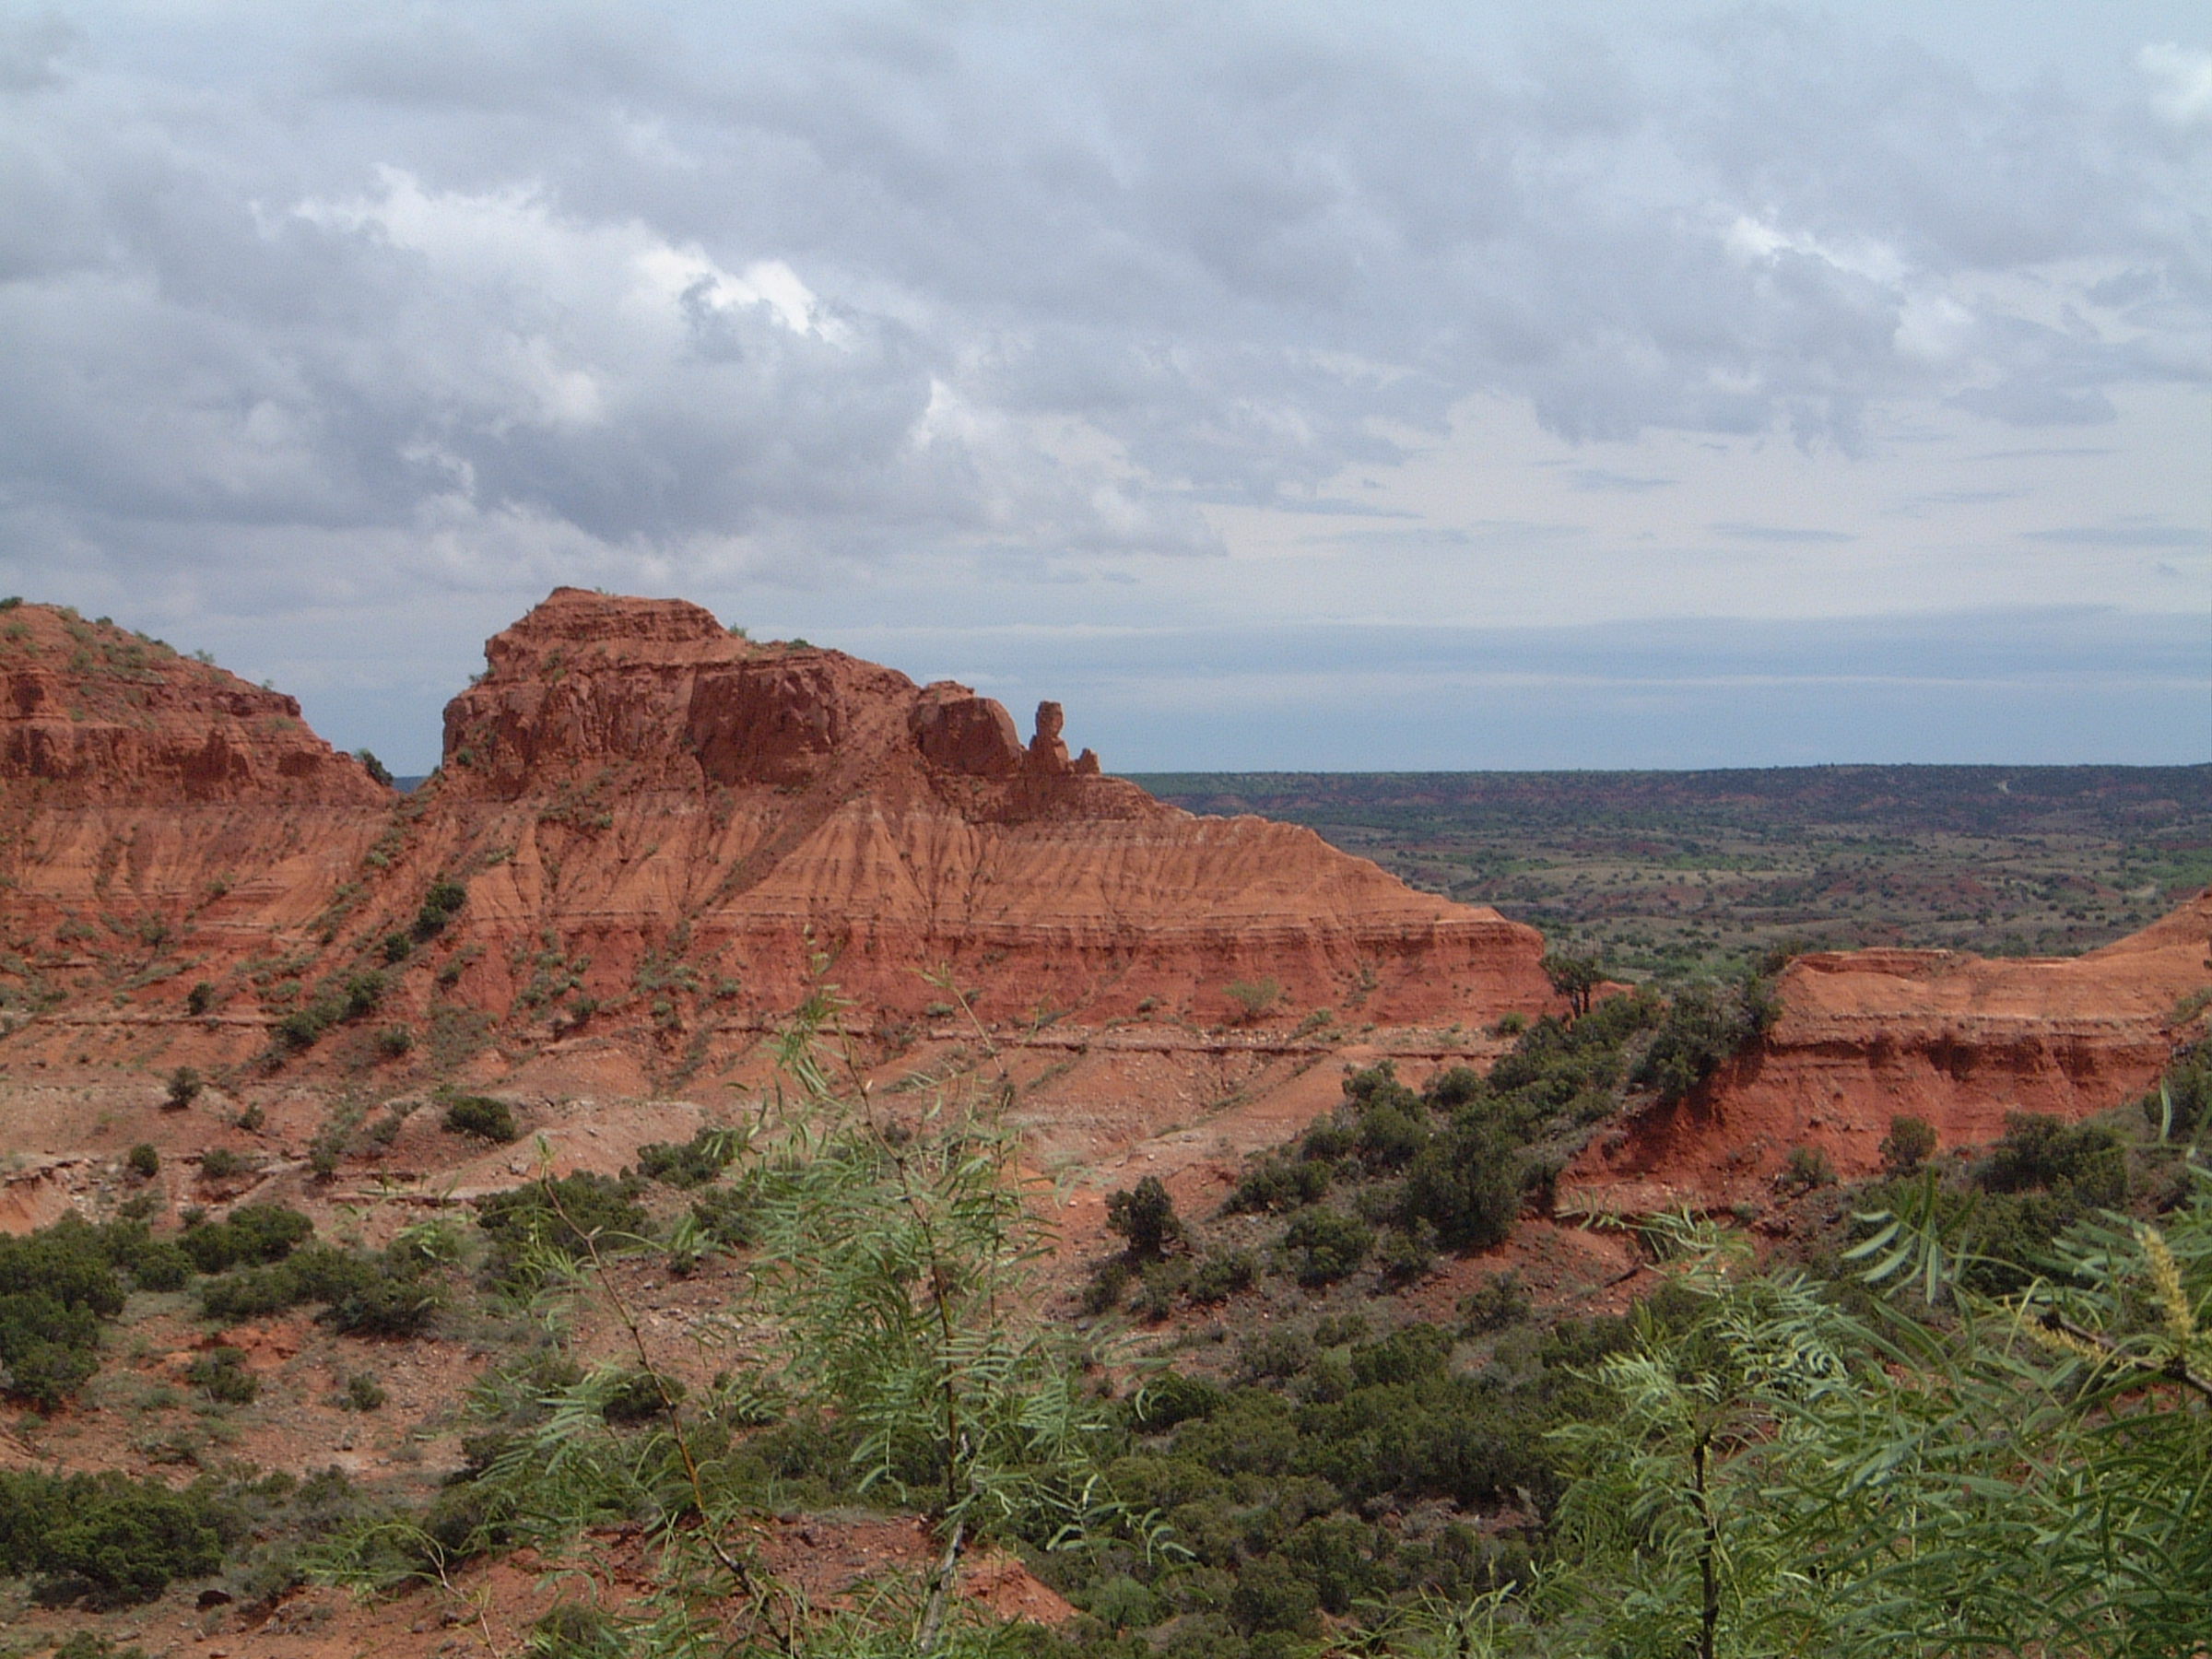 A landscape view of a desert canyon with red rock formations under a cloudy sky, featuring sparse vegetation and distant shrub-covered terrain.